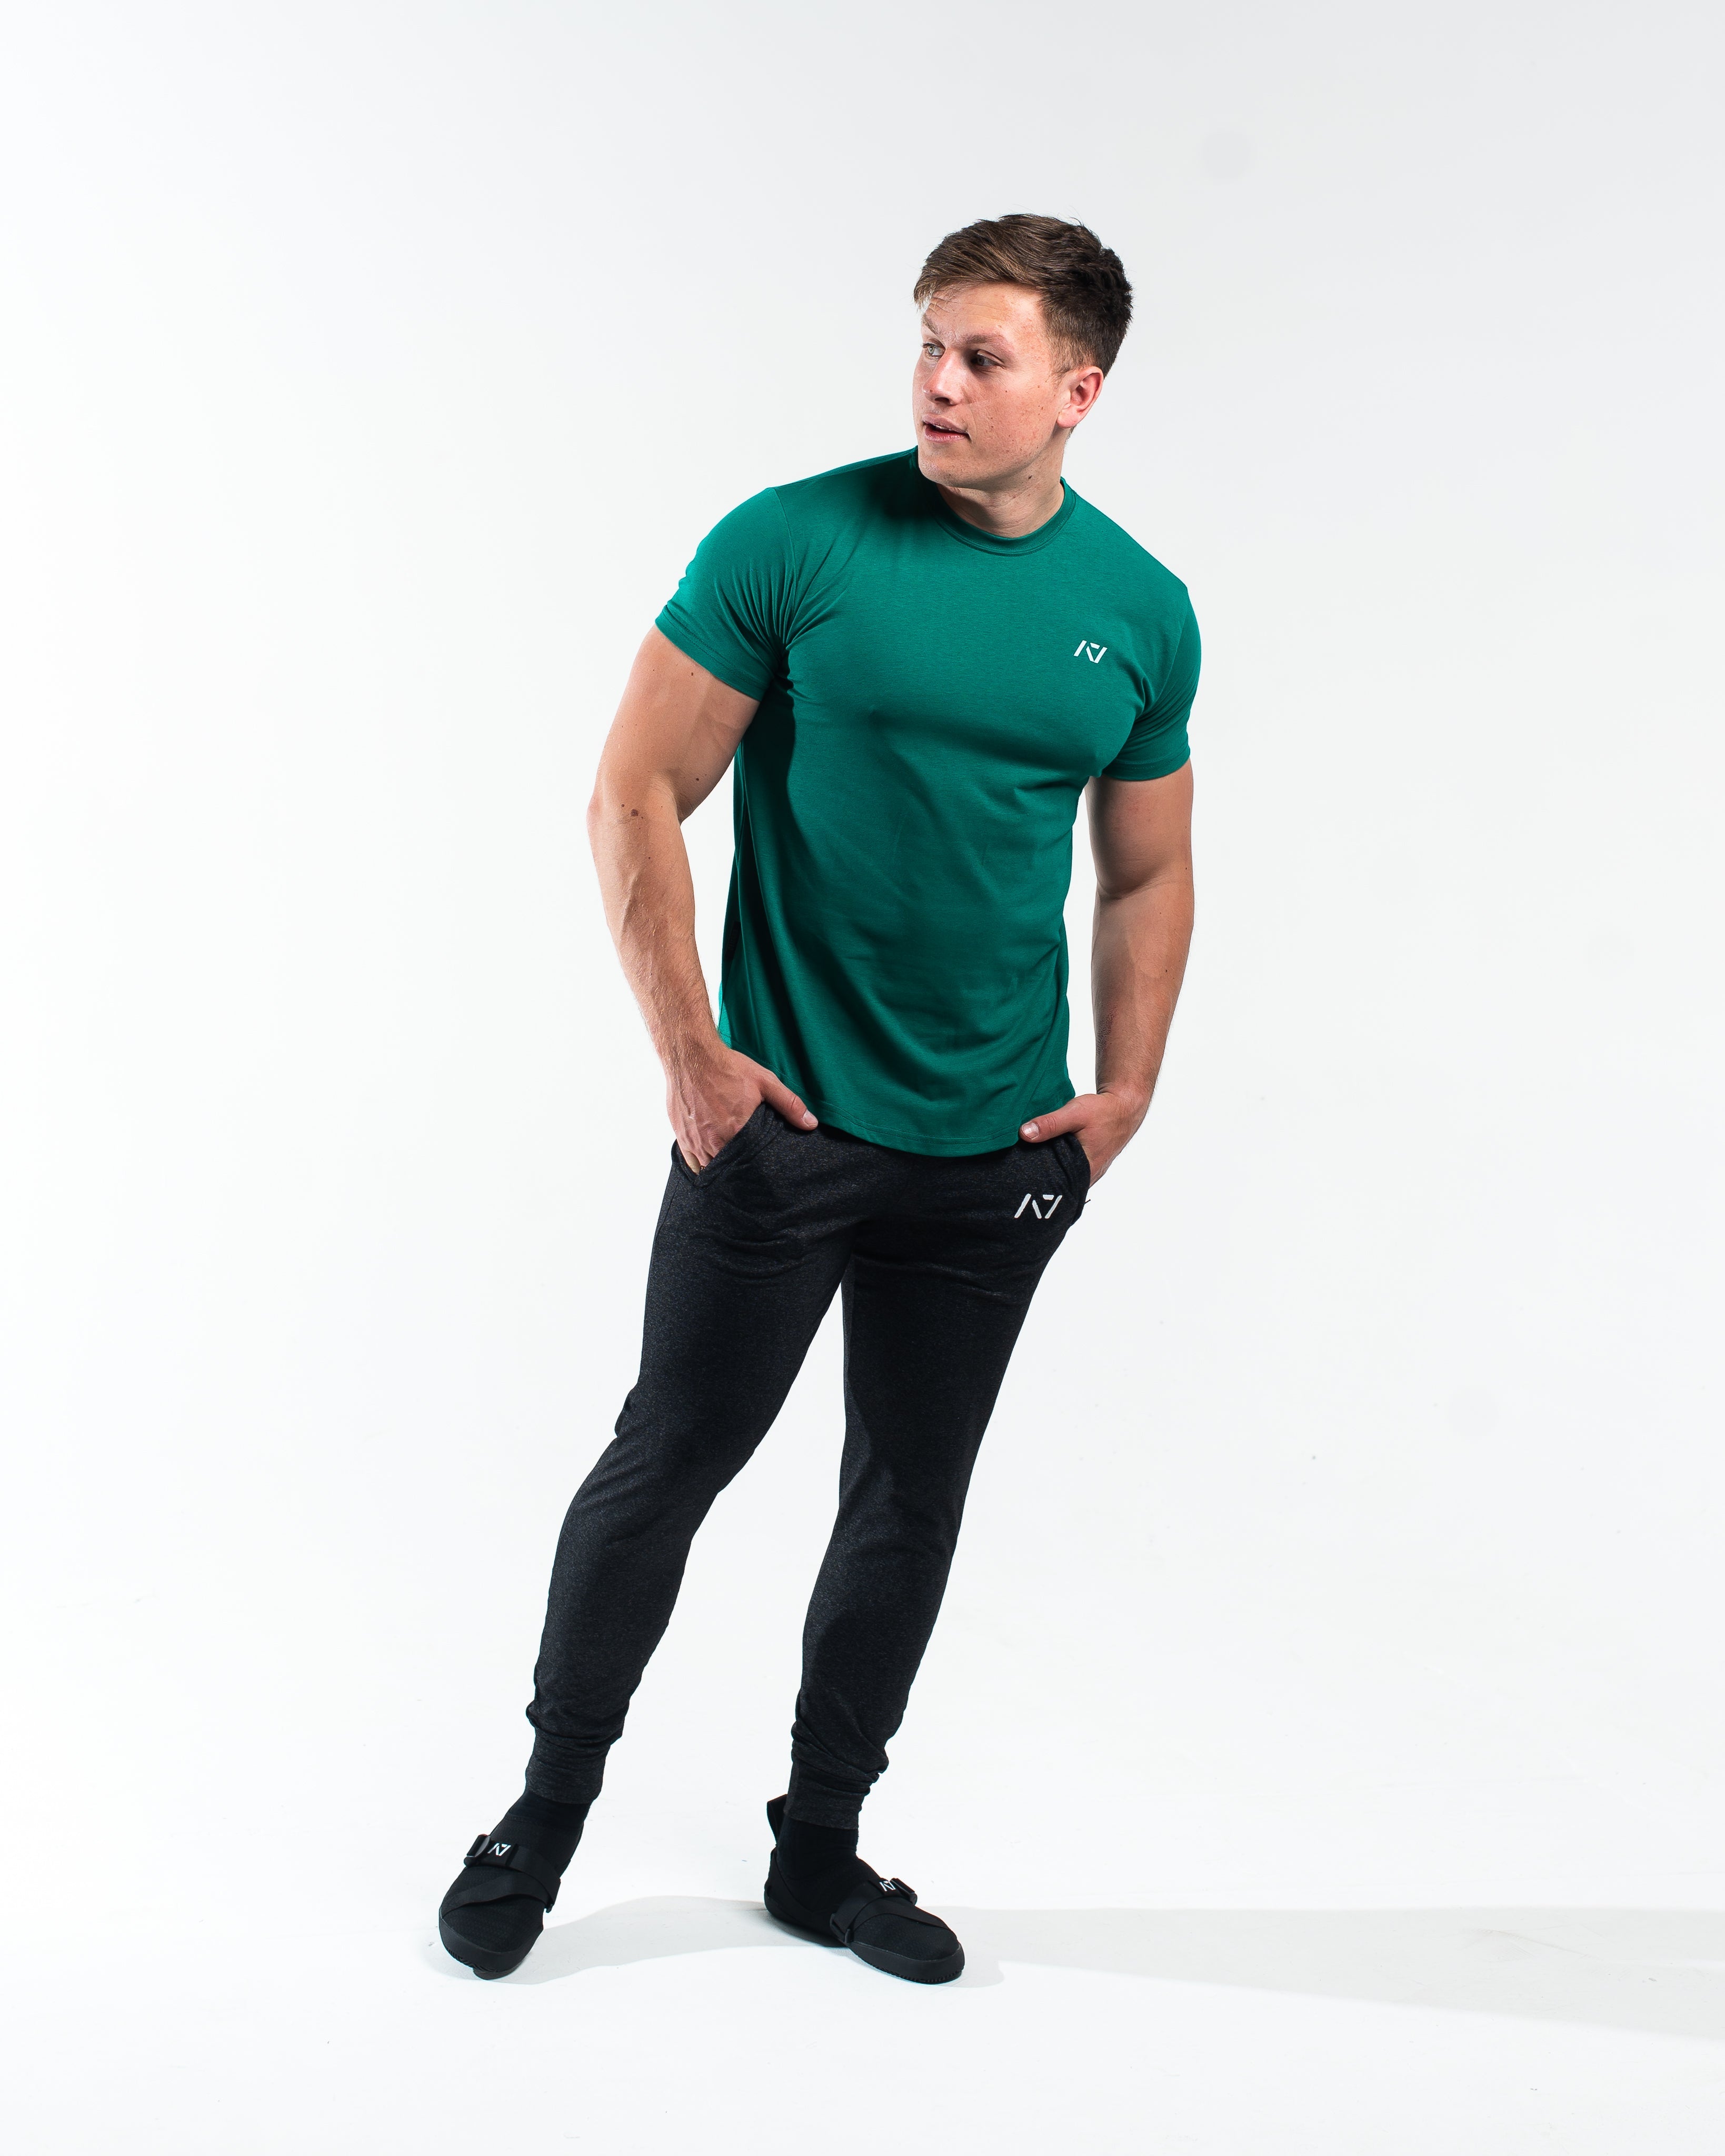 The Balance Collection combines comfort and aesthetics. The pieces in this collection are made with comfortable fabrics and minimal logos to create a simple, yet impactful look. All A7 Powerlifting Equipment shipping to UK, Norway, Switzerland and Iceland.